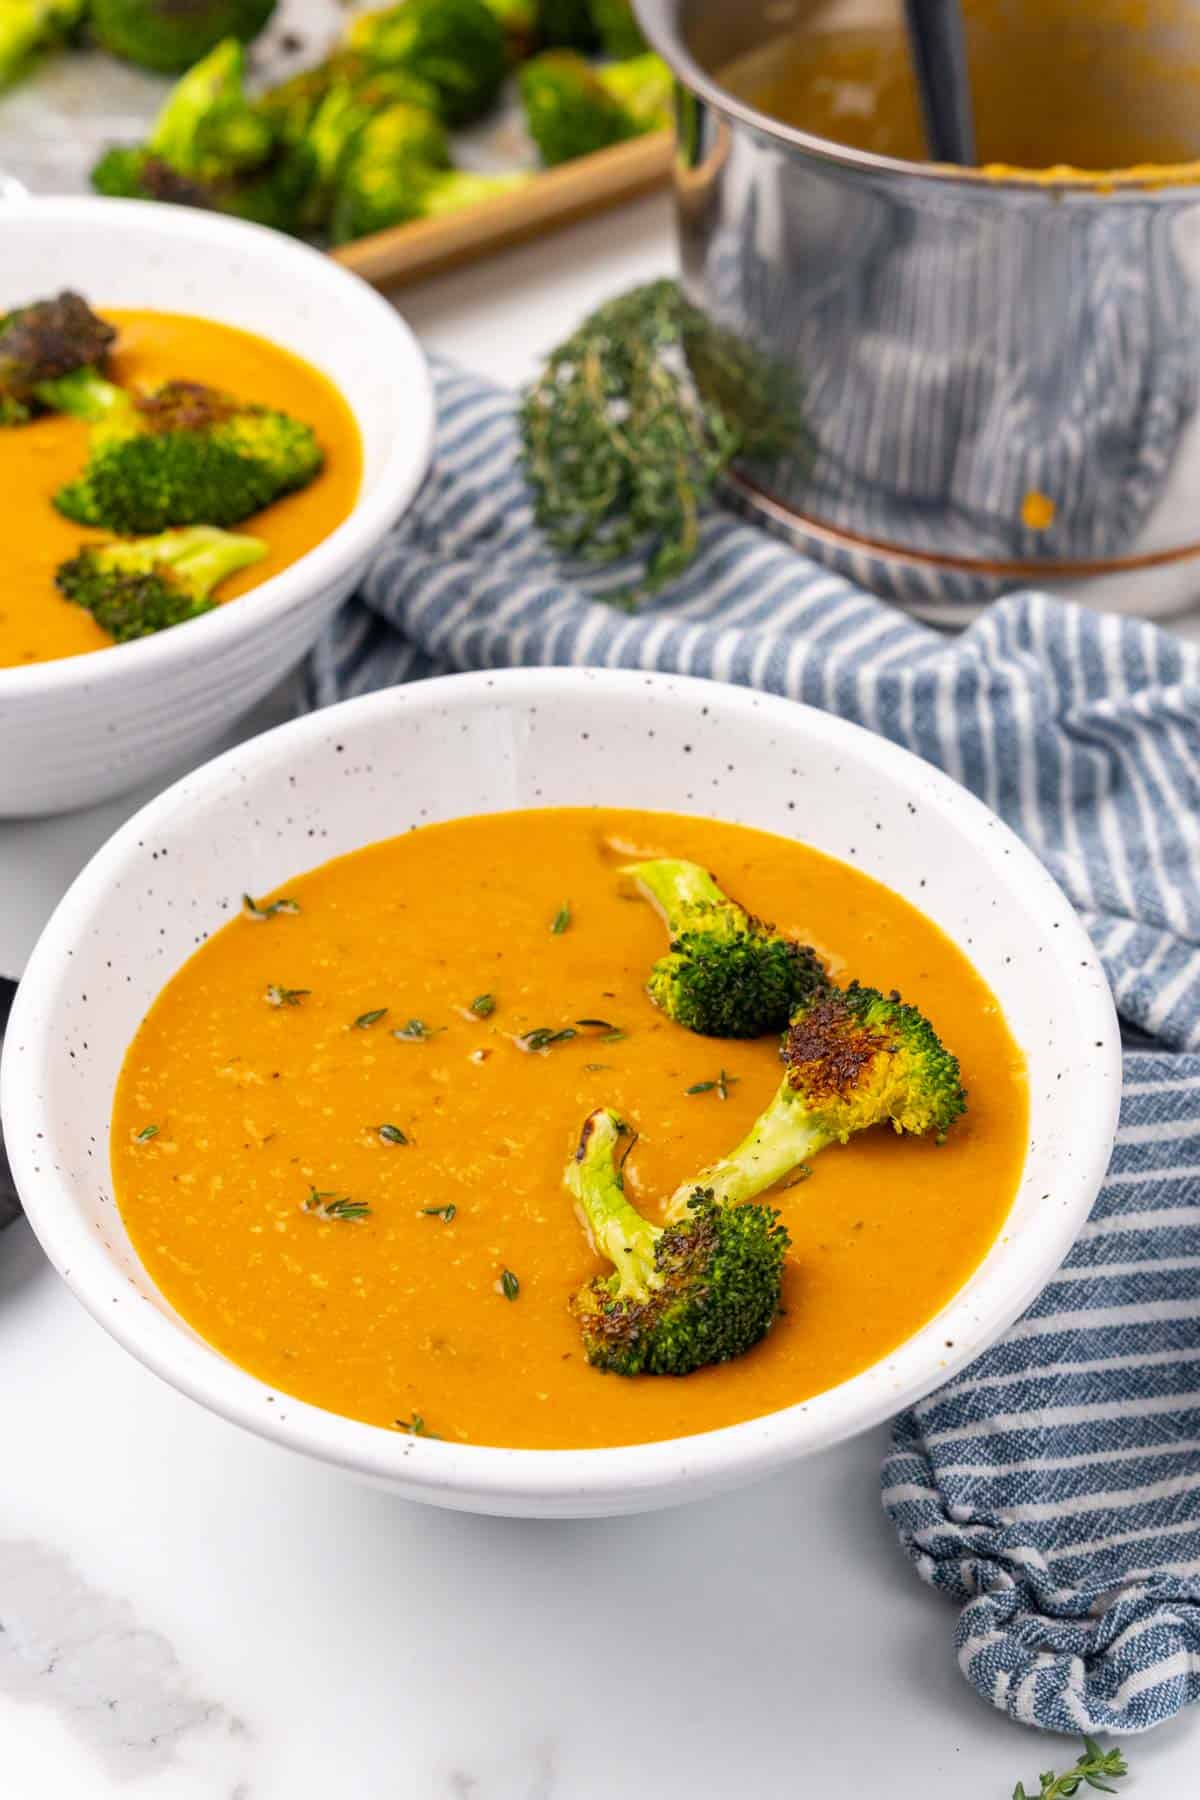 Side view of a white speckled bowl of soup with broccoli florets on top next to a blue striped napkin with a second bowl of soup and saucepan in the background